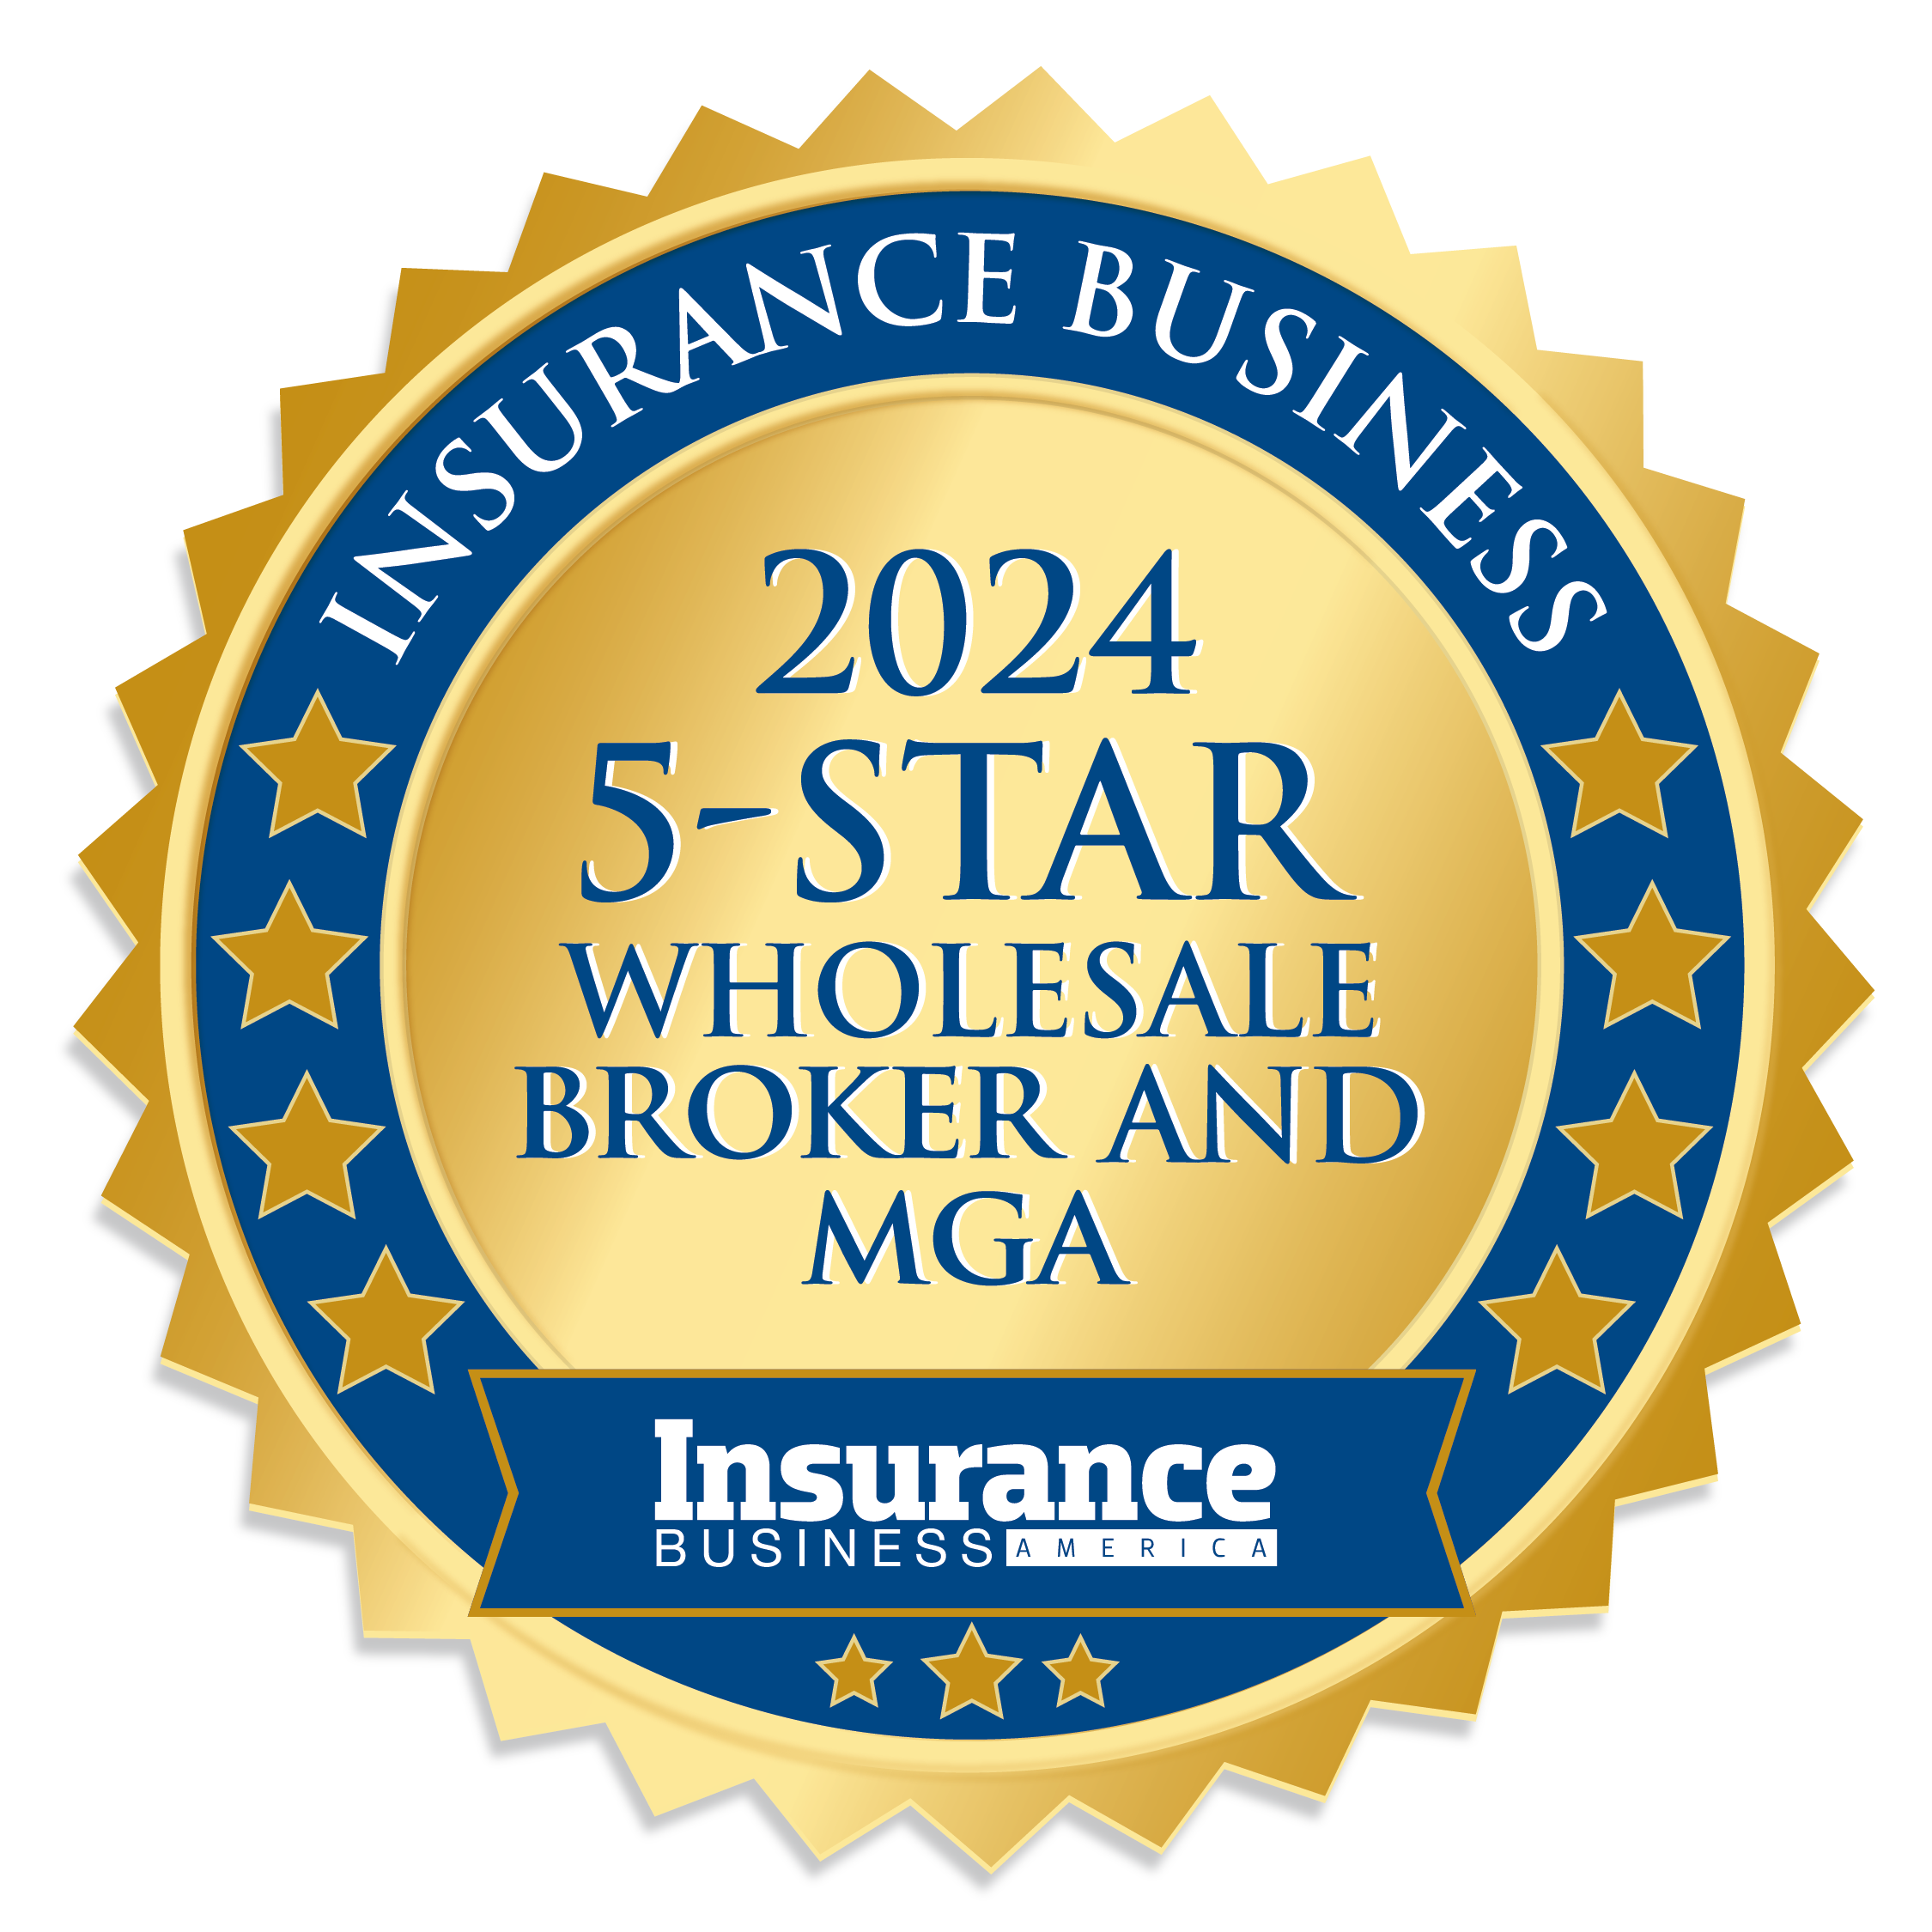 https://www.insurancebusinessmag.com/us/best-insurance/best-wholesale-brokers-usa--5star-wholesale-brokers-and-mgas-478736.aspx